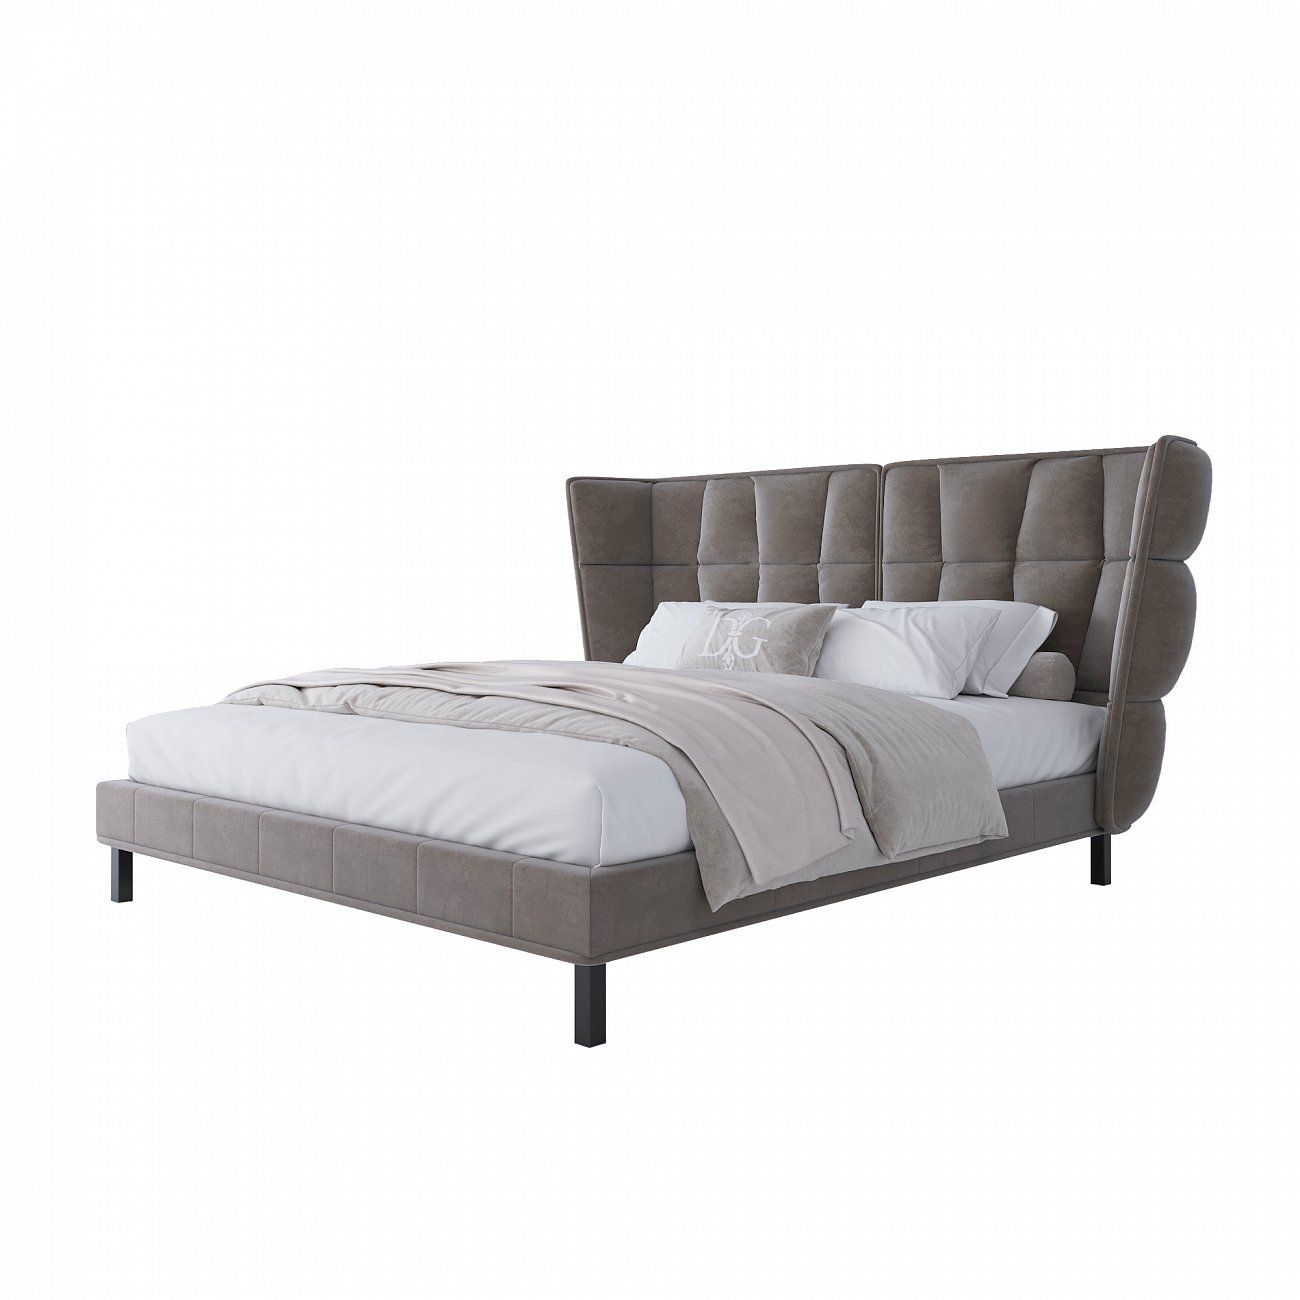 Double bed 180x200 cm Husk (box spring)